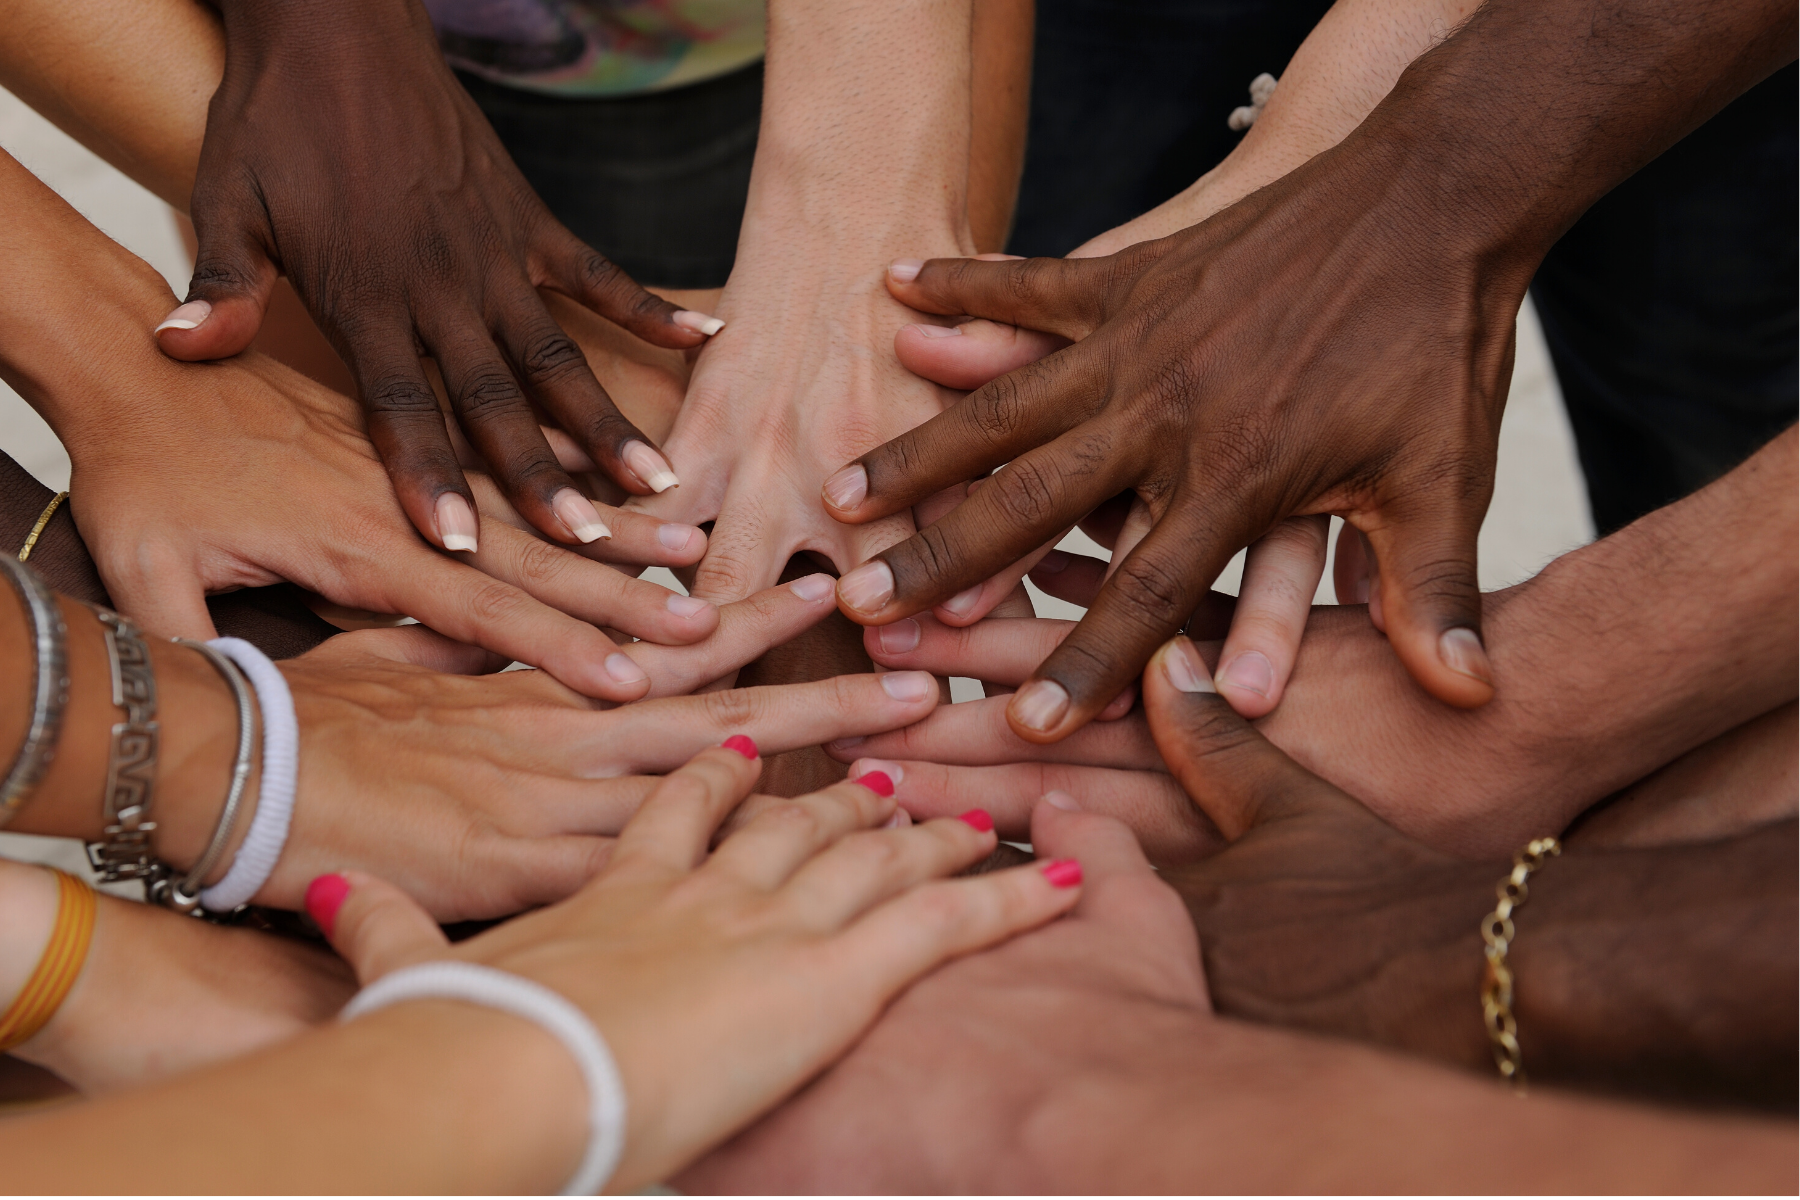 focus on our humanity, multiracial hands together